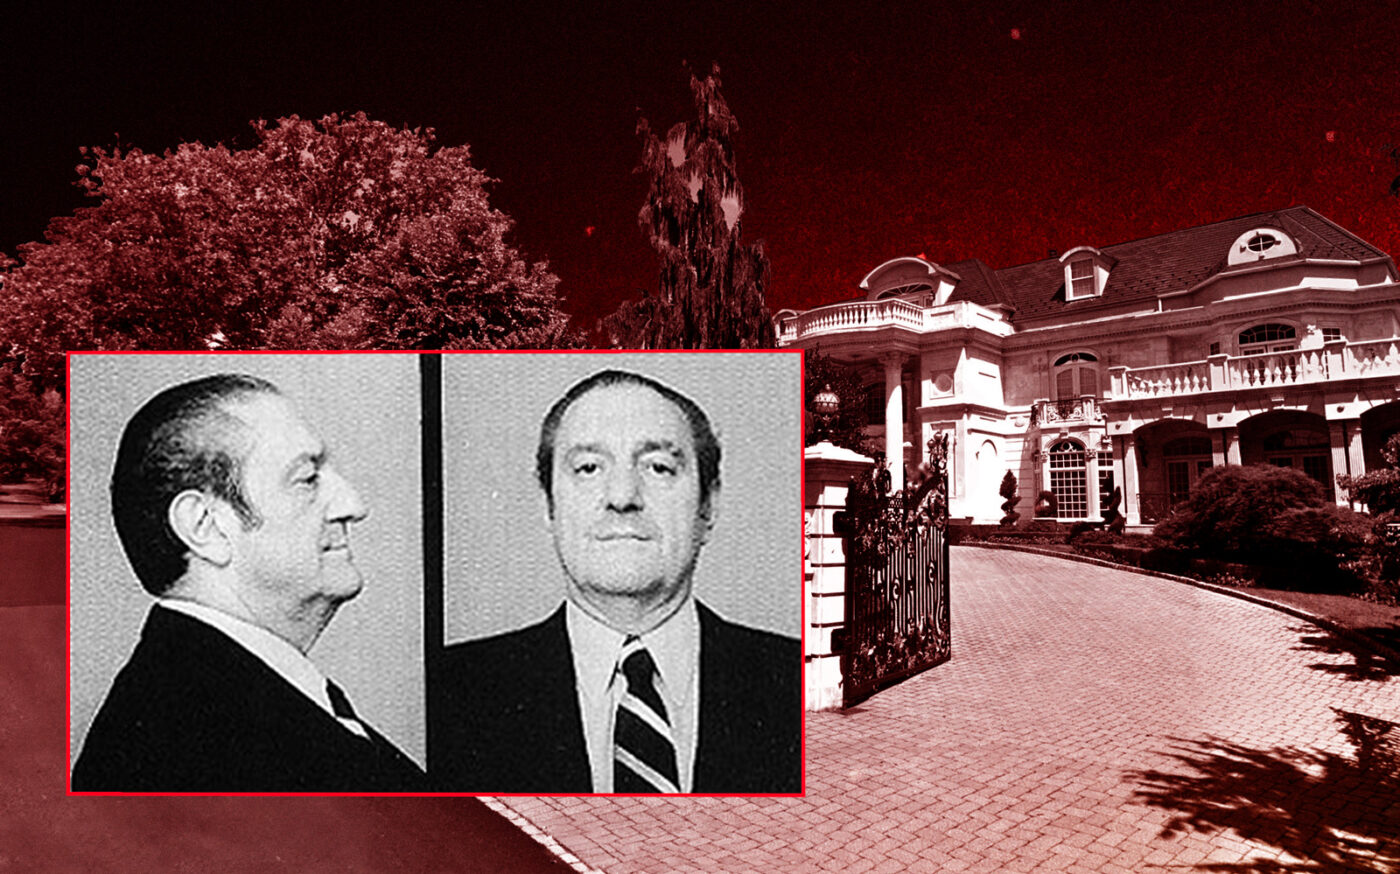 The Wine Collection of Mobster John Gotti Is For Sale at a NYC Shop